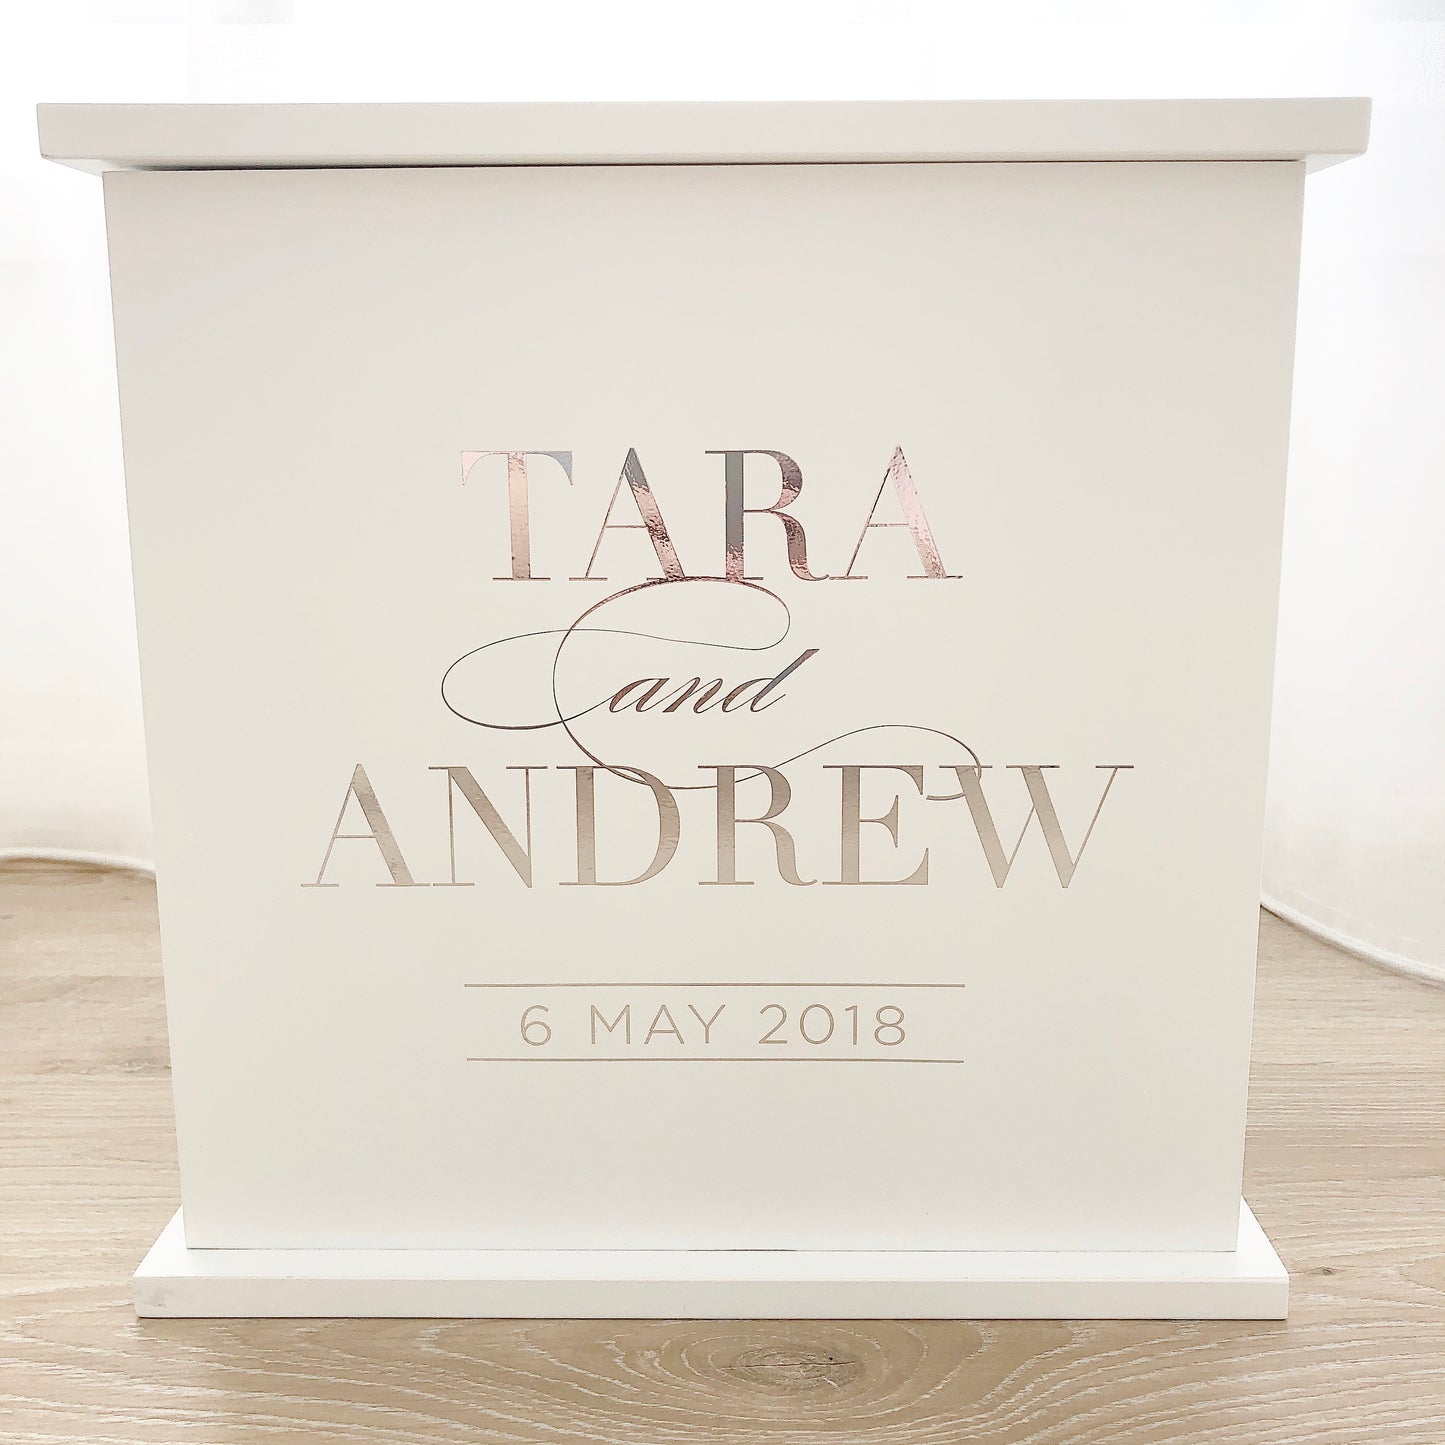 White personalised wooden wishing well box to hold all the well wishes and cards at your wedding.